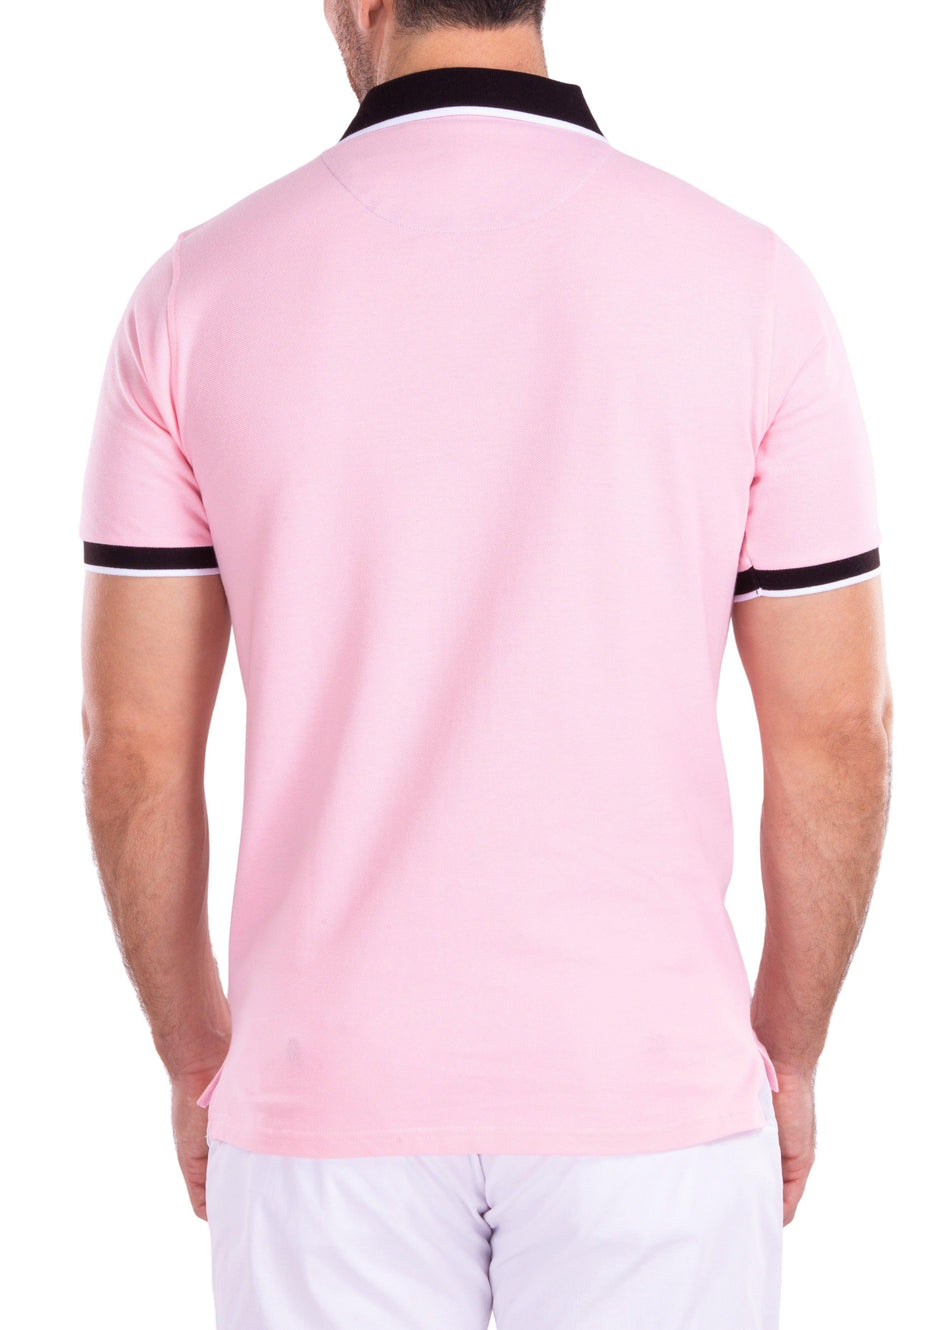 Men's Essentials Short Sleeve Polo Shirt Solid Pink